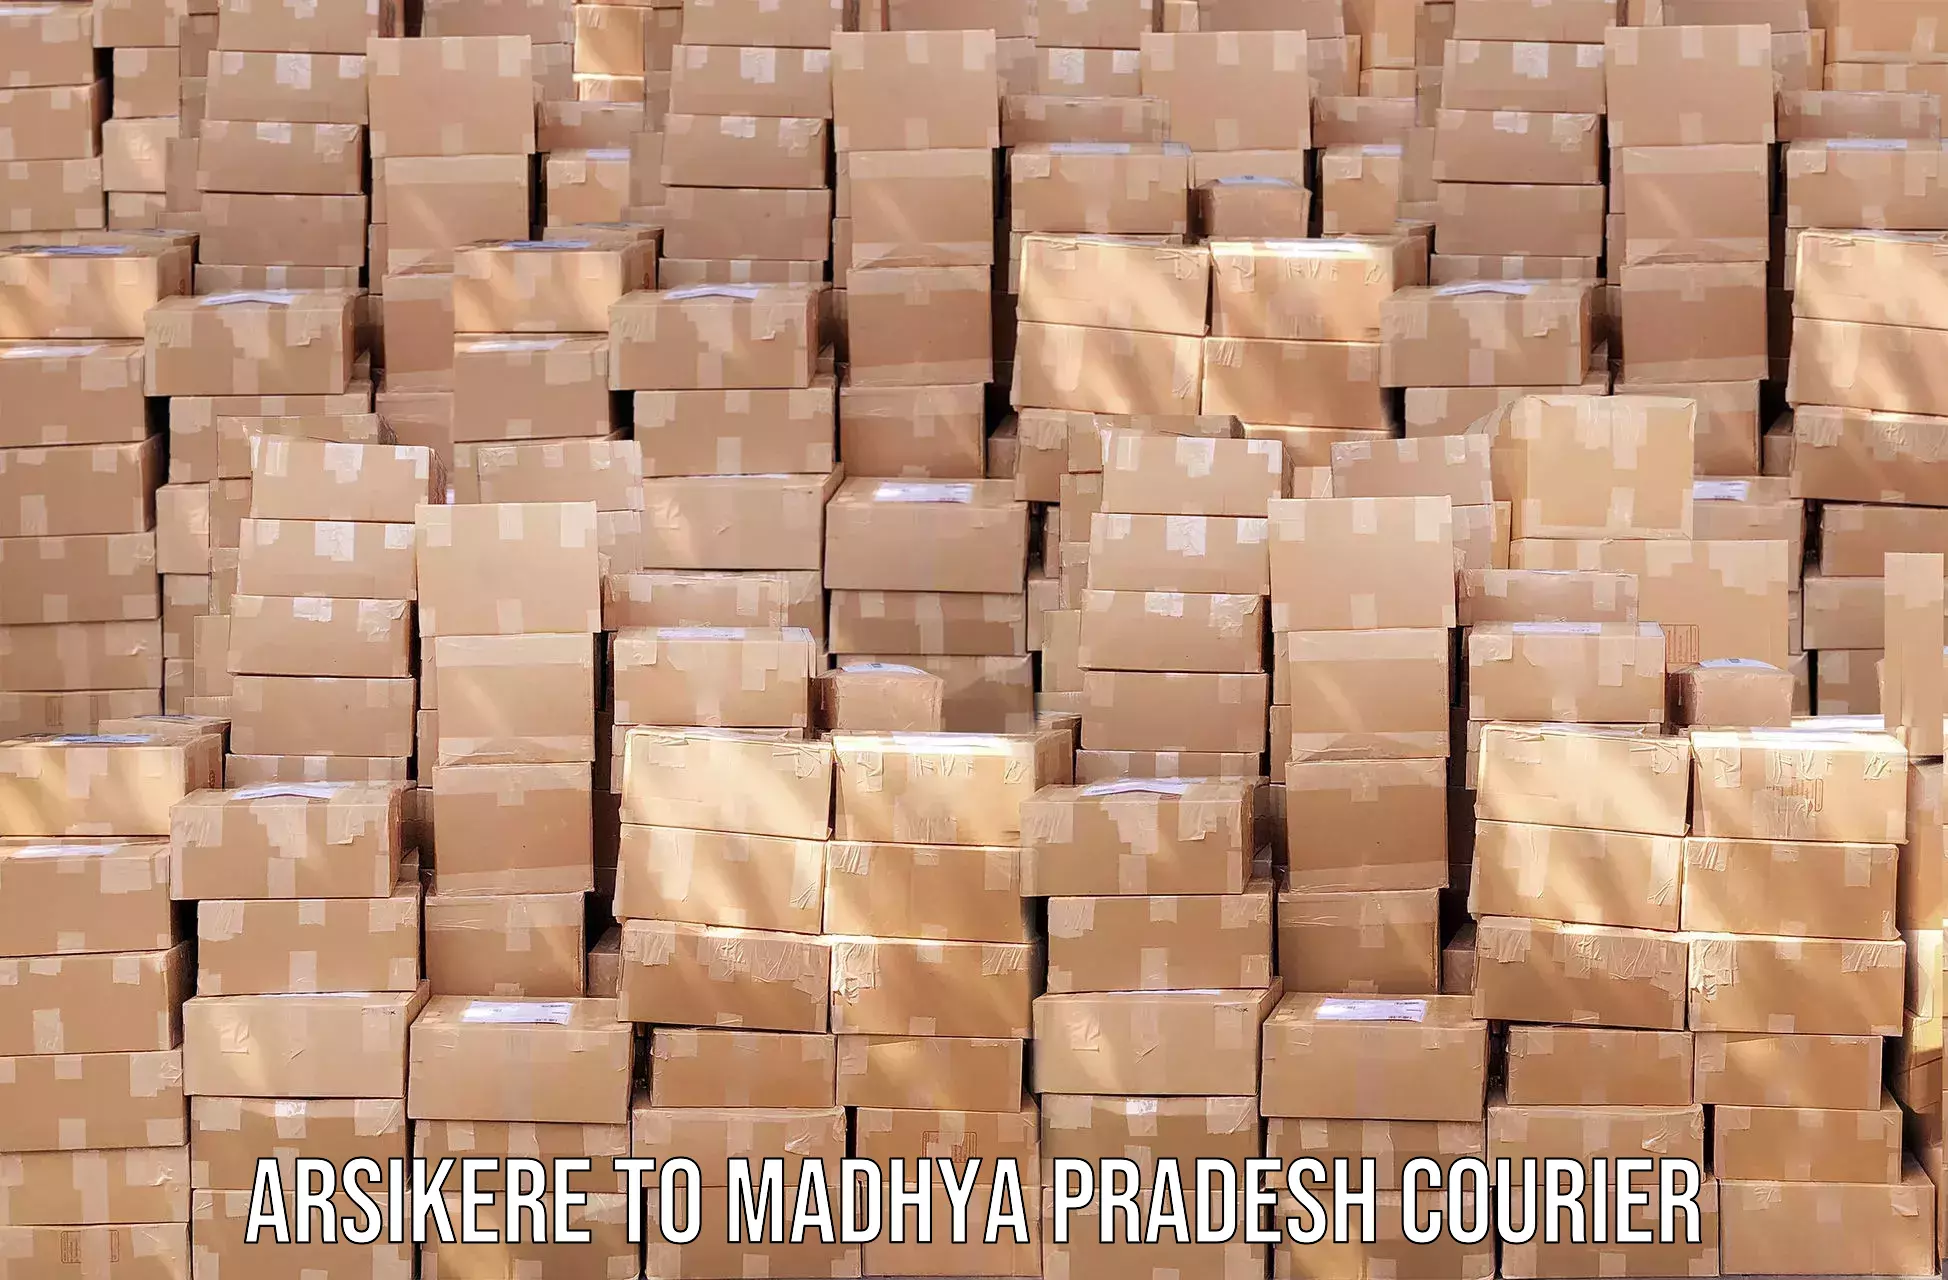 Package delivery network Arsikere to Madhya Pradesh